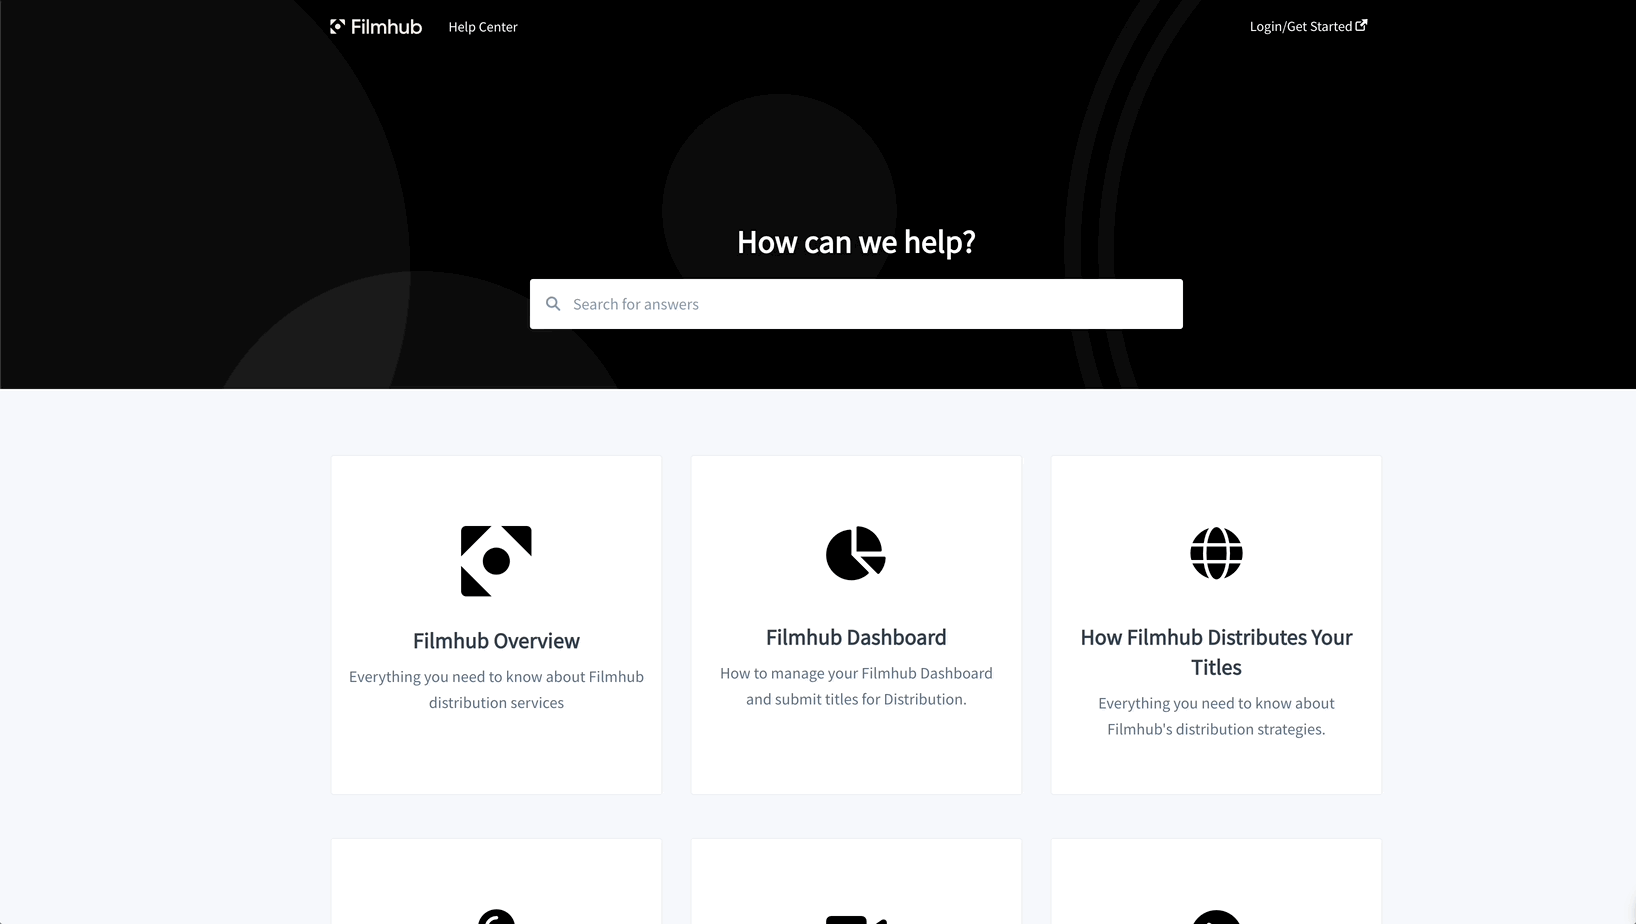 Help Center search